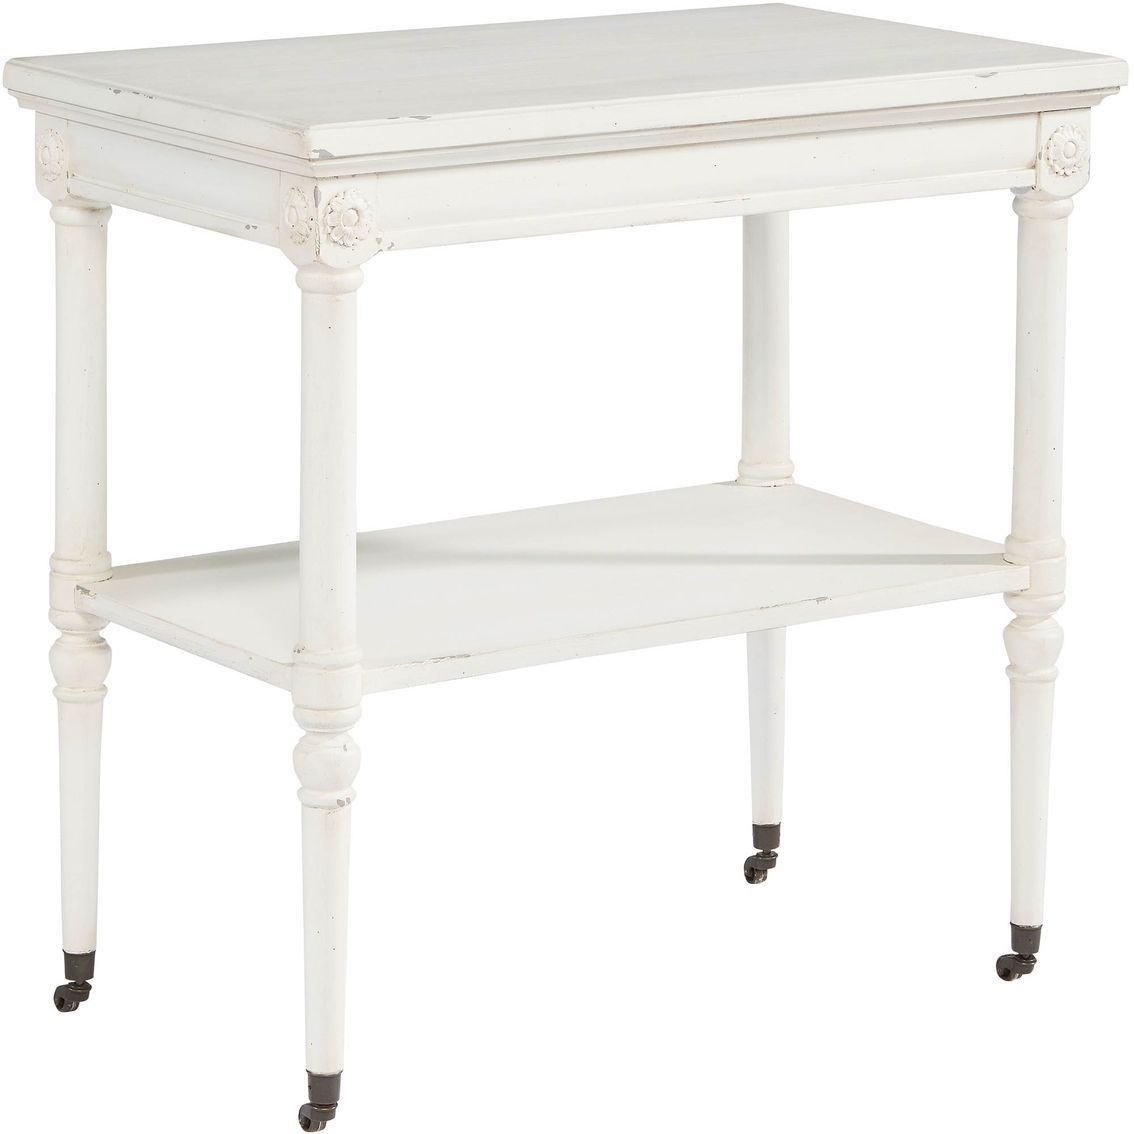 The Magnolia Home Side Table Has A French Inspired Design That Throughout Current Magnolia Home Taper Turned Bench Gathering Tables With Zinc Top (View 18 of 20)